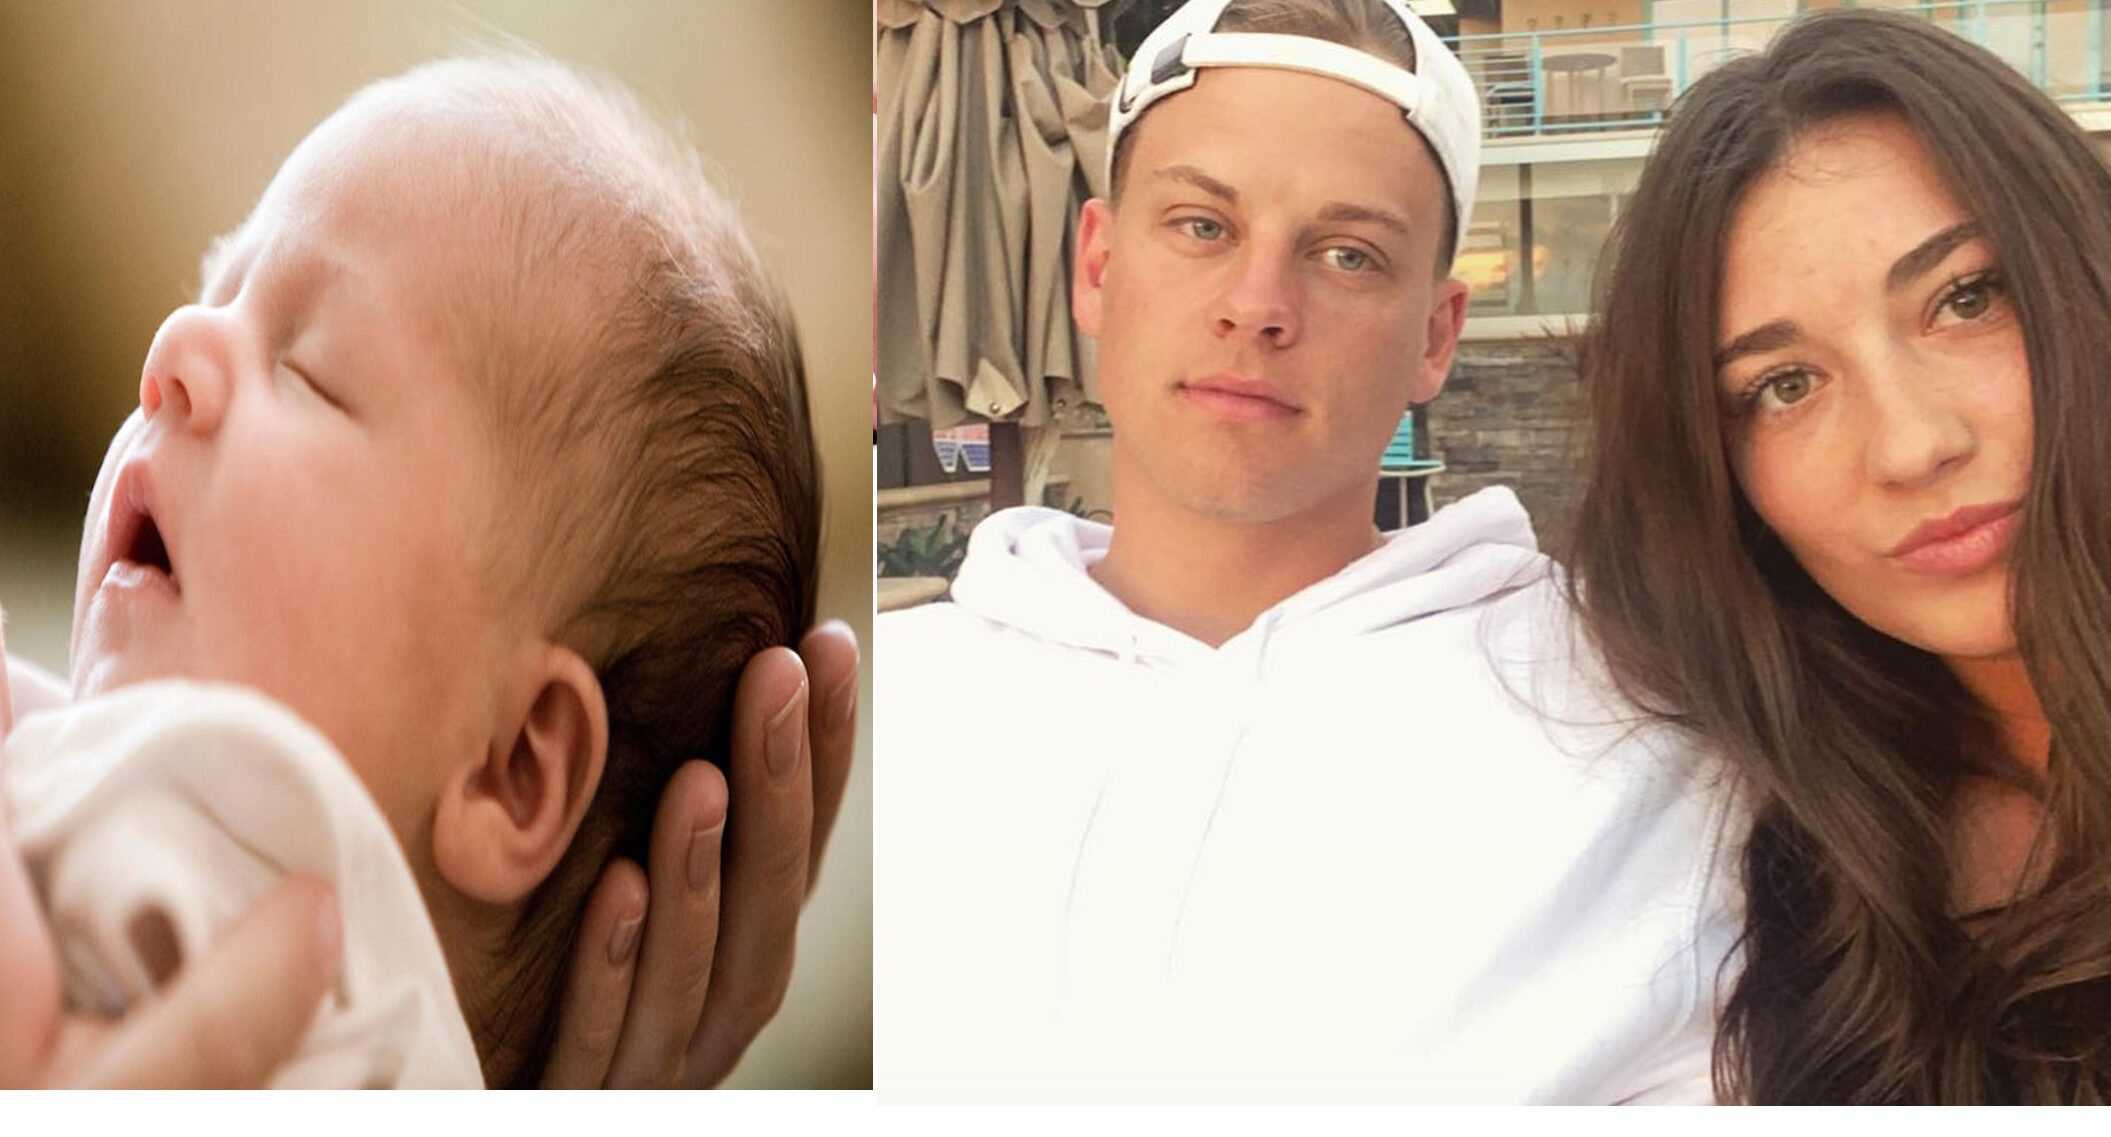 There's a time for everything, and now it's family time!" Joe Burrow announces his retirement to prioritize spending quality time with his family and newborn baby.